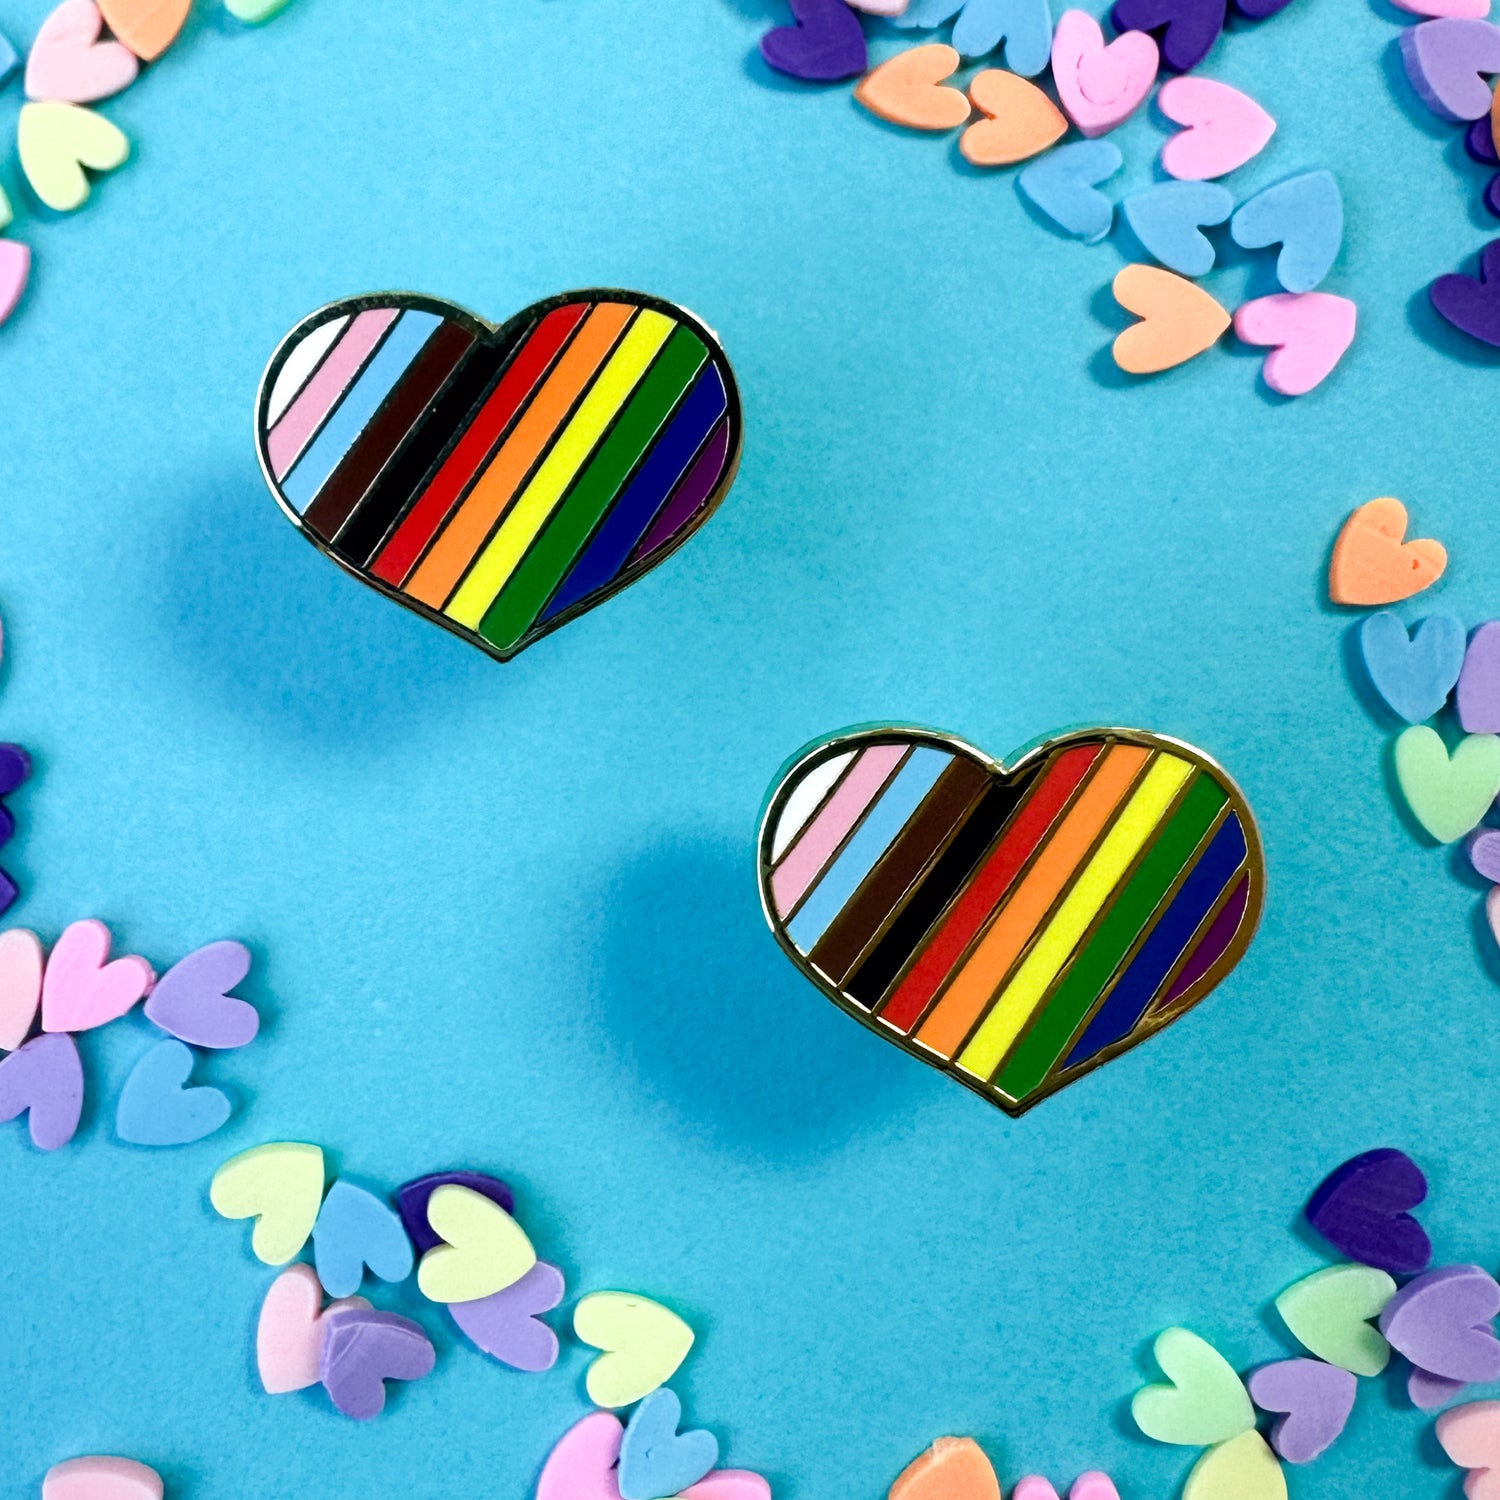 Two earrings in the shape of chunky hearts with diagonal stripes of the inclusive pride flag. The earrings are on a blue background with pastel heart confetti around. 